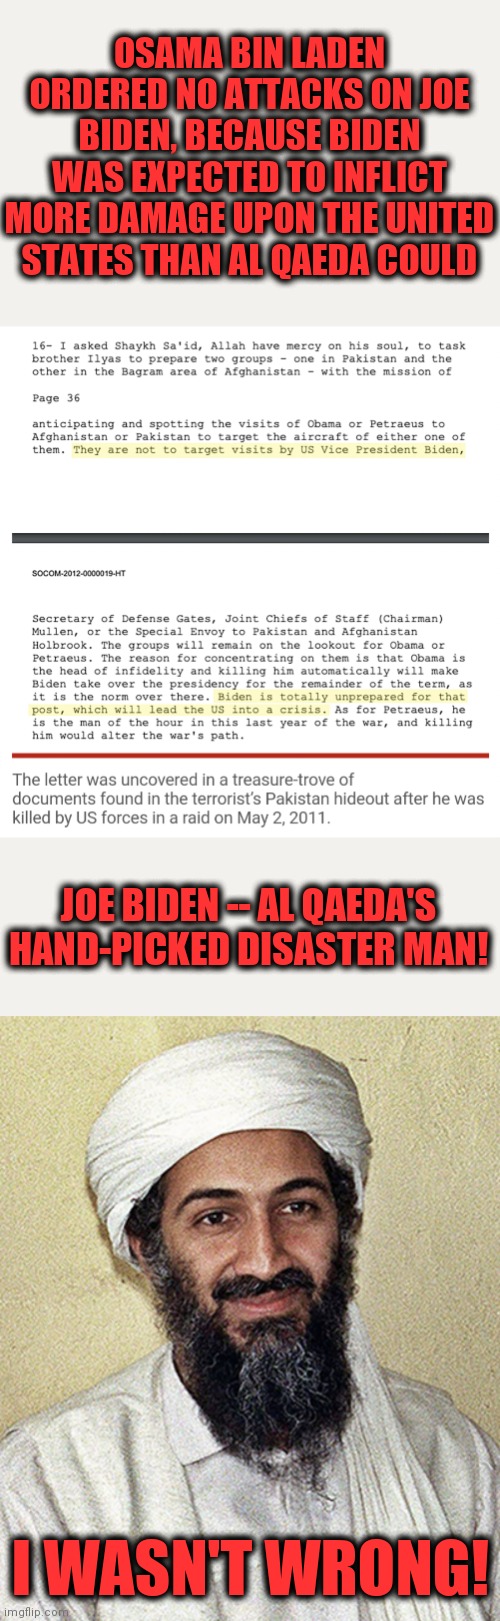 Now that Biden's presidency is finished, Americans can be told what Al Qaeda knew 10 years ago! | OSAMA BIN LADEN ORDERED NO ATTACKS ON JOE BIDEN, BECAUSE BIDEN WAS EXPECTED TO INFLICT MORE DAMAGE UPON THE UNITED STATES THAN AL QAEDA COULD; JOE BIDEN -- AL QAEDA'S HAND-PICKED DISASTER MAN! I WASN'T WRONG! | image tagged in memes,joe biden,osama bin laden,senile creep,al qaeda | made w/ Imgflip meme maker